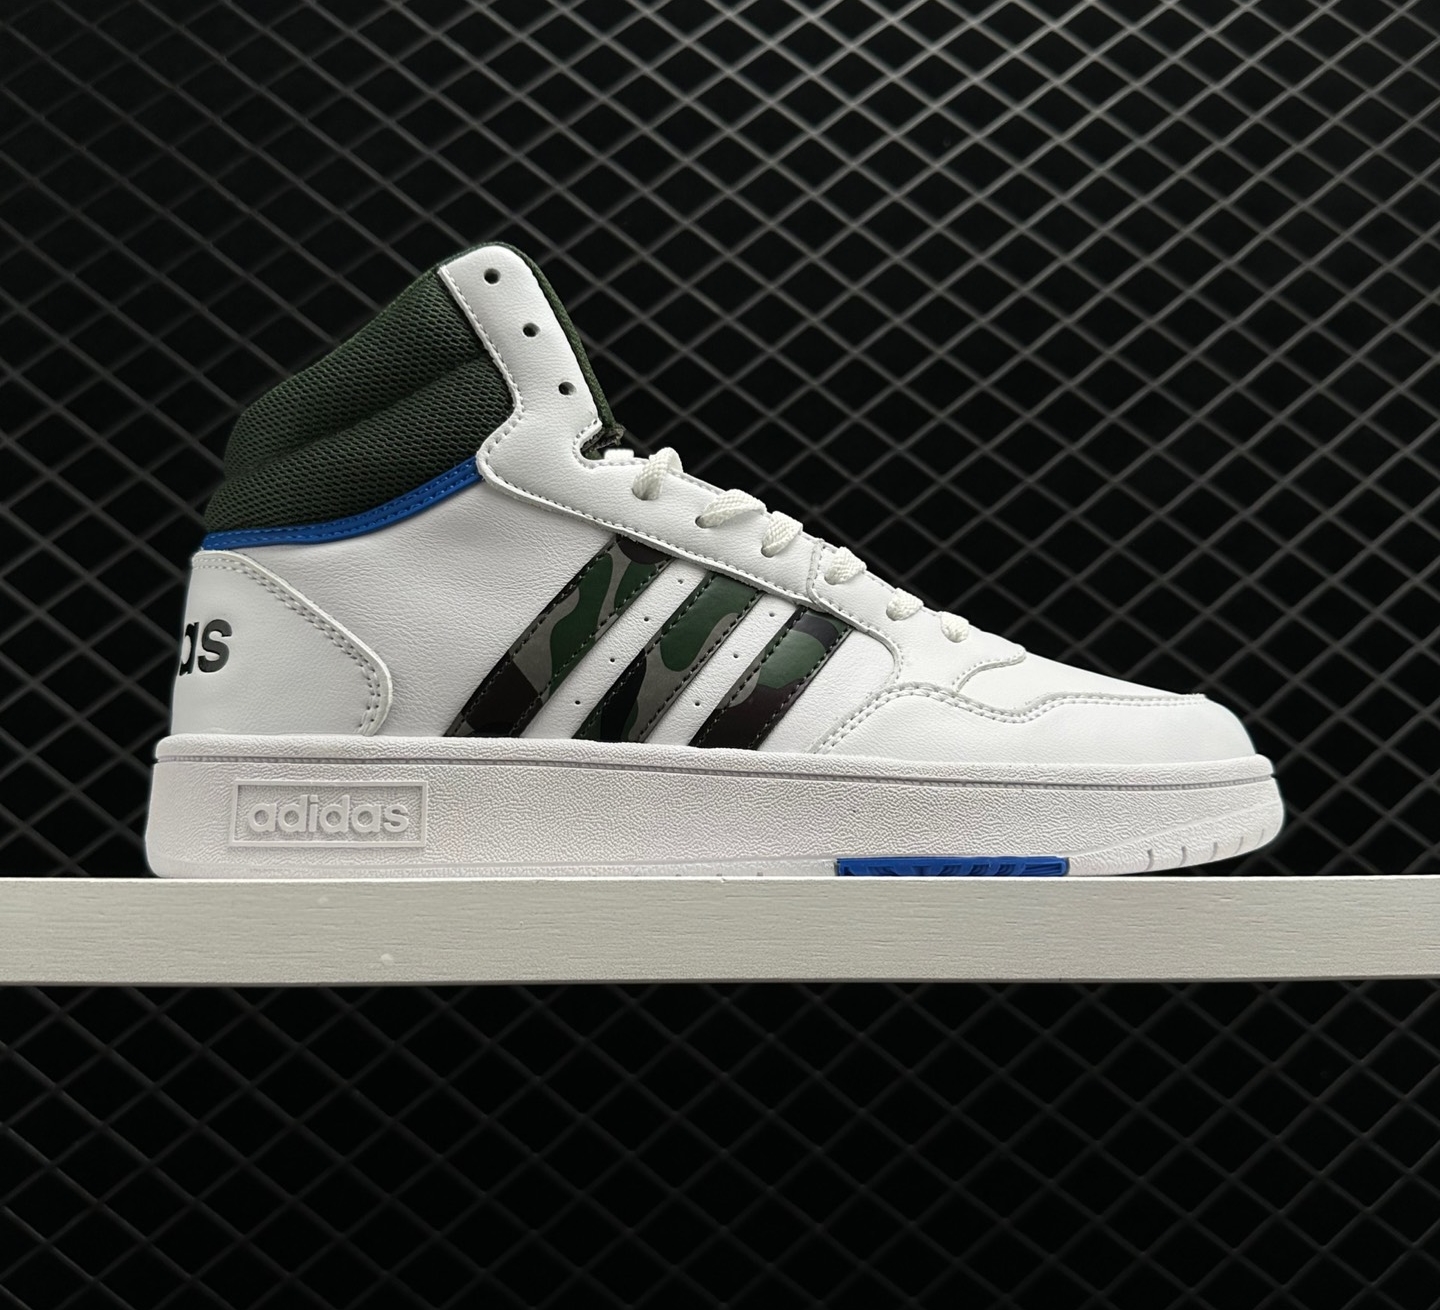 Adidas Hoops 3.0 Mid 'White Green Oxide Camo' GY4747 - Stylish and Versatile Footwear for All-Day Comfort